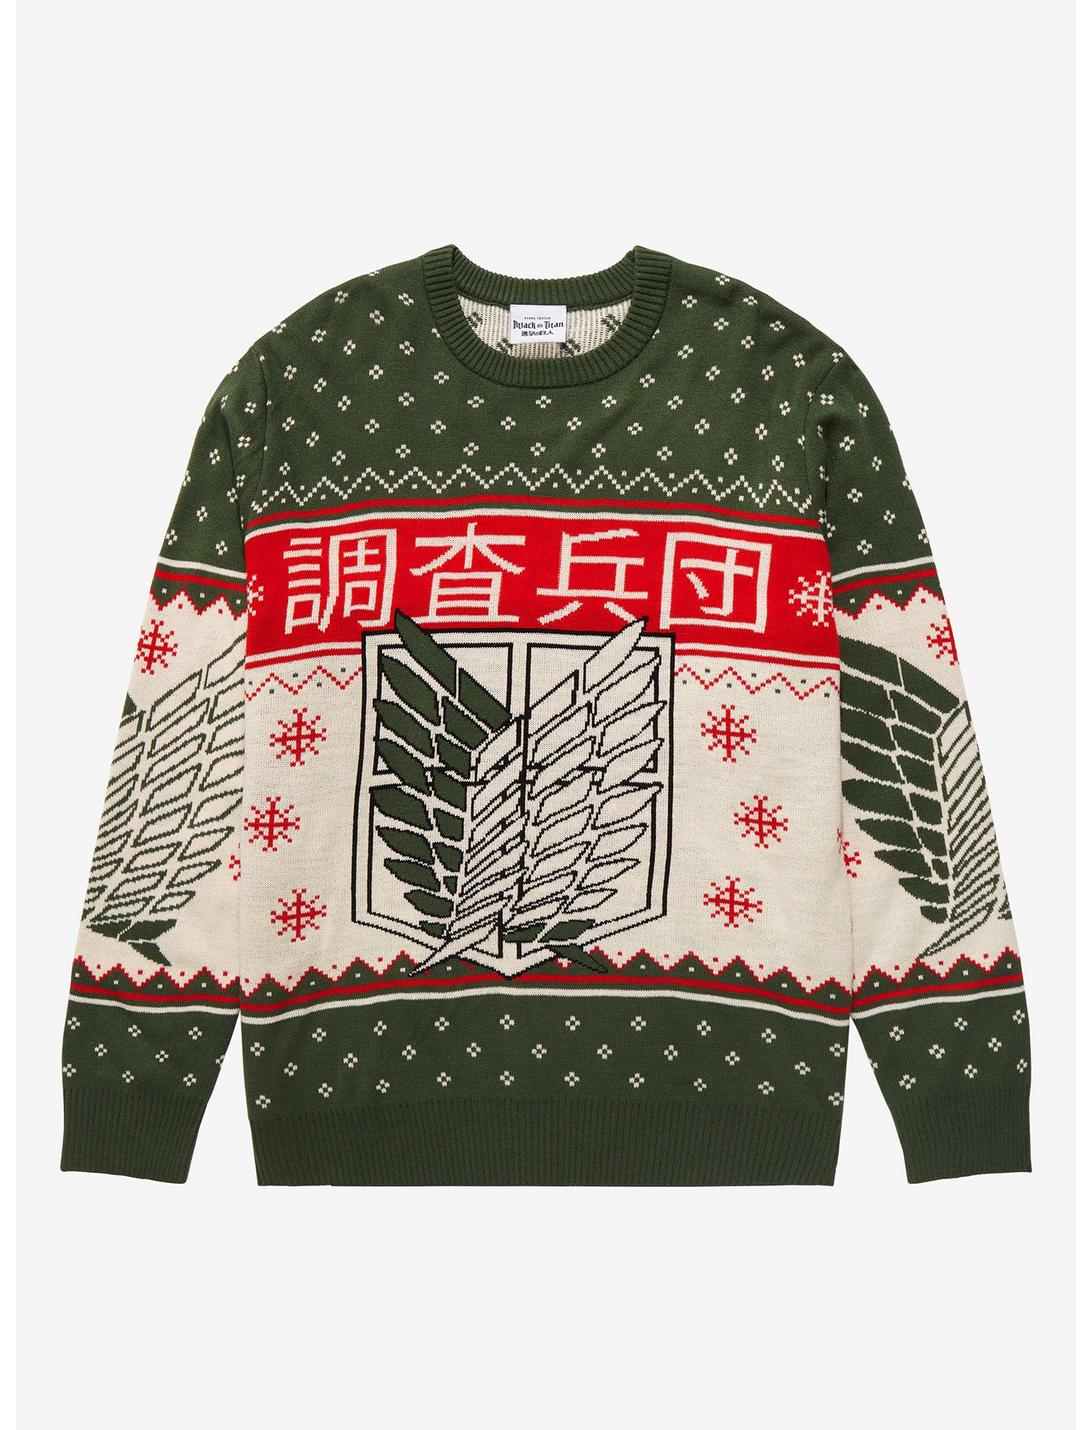 Attack on Titan Scout Regiment Crest Holiday Sweater - BoxLunch Exclusive, FOREST, hi-res